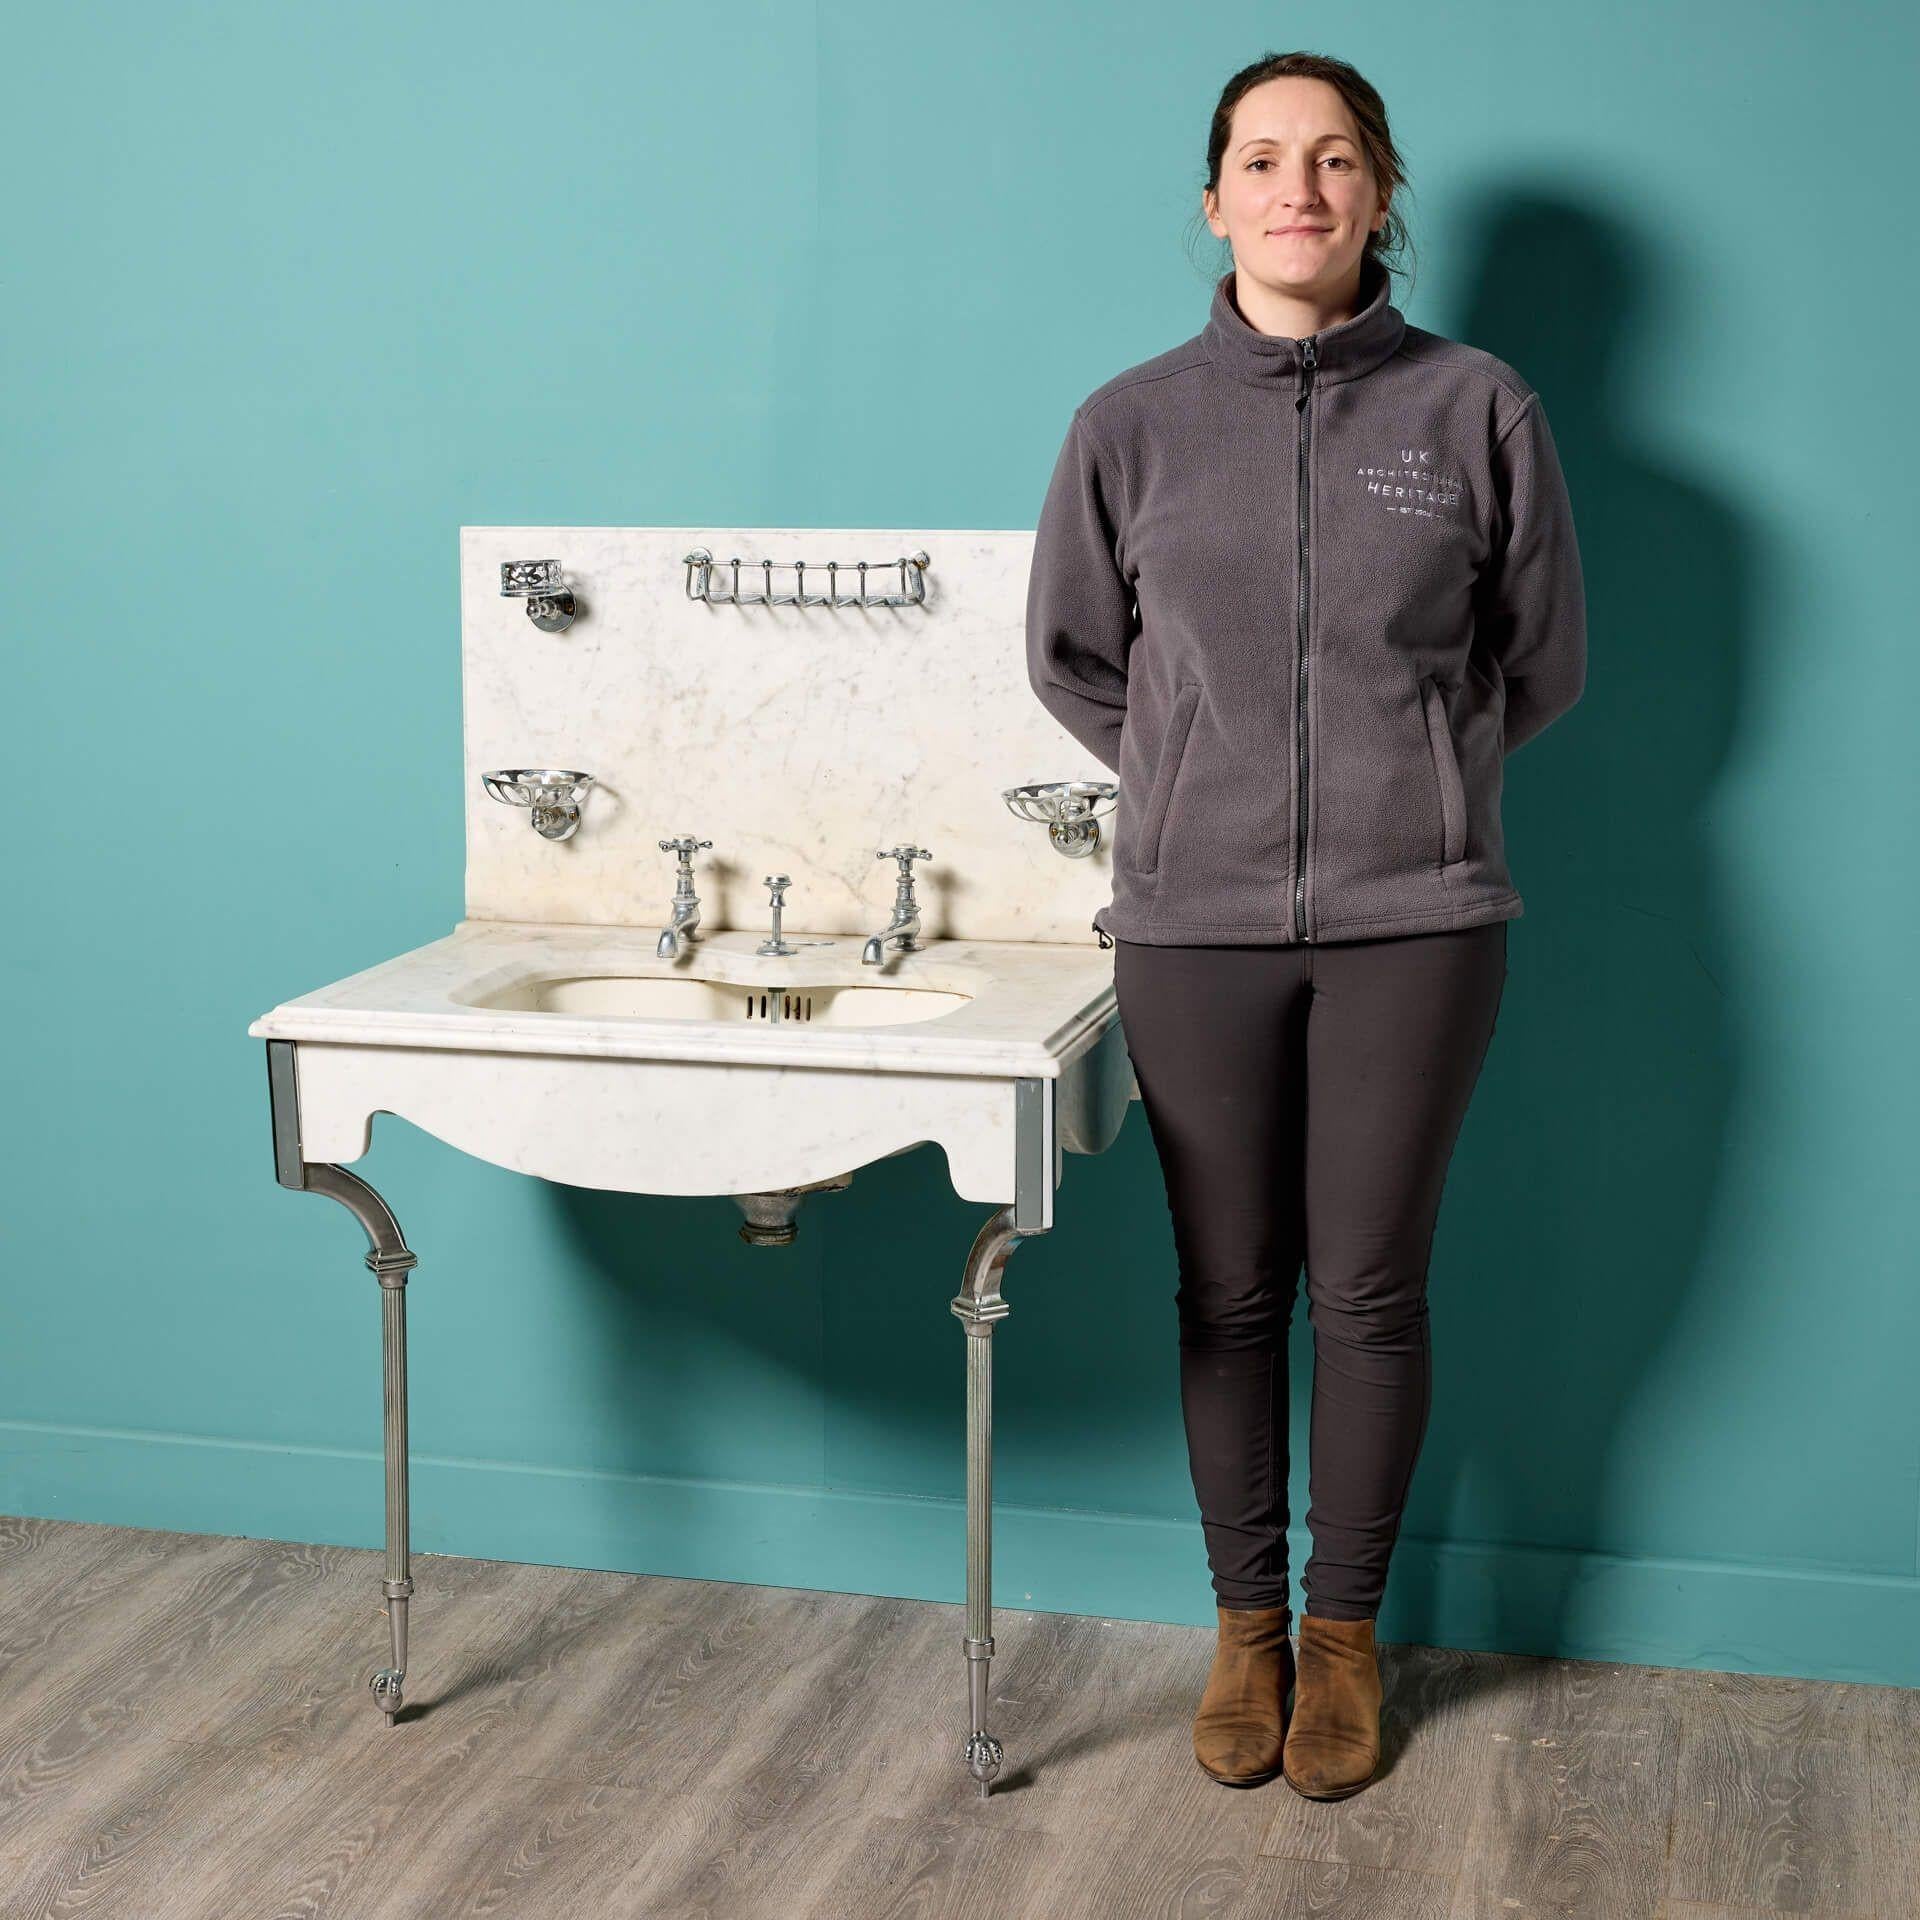 An antique Shanks Carrara marble sink sourced from a country house in Cheshire, England. Dating from the early 20th century, this beautiful Shanks sink has an original shaped marble skirt and undercoated porcelain basin, making it a rare piece and